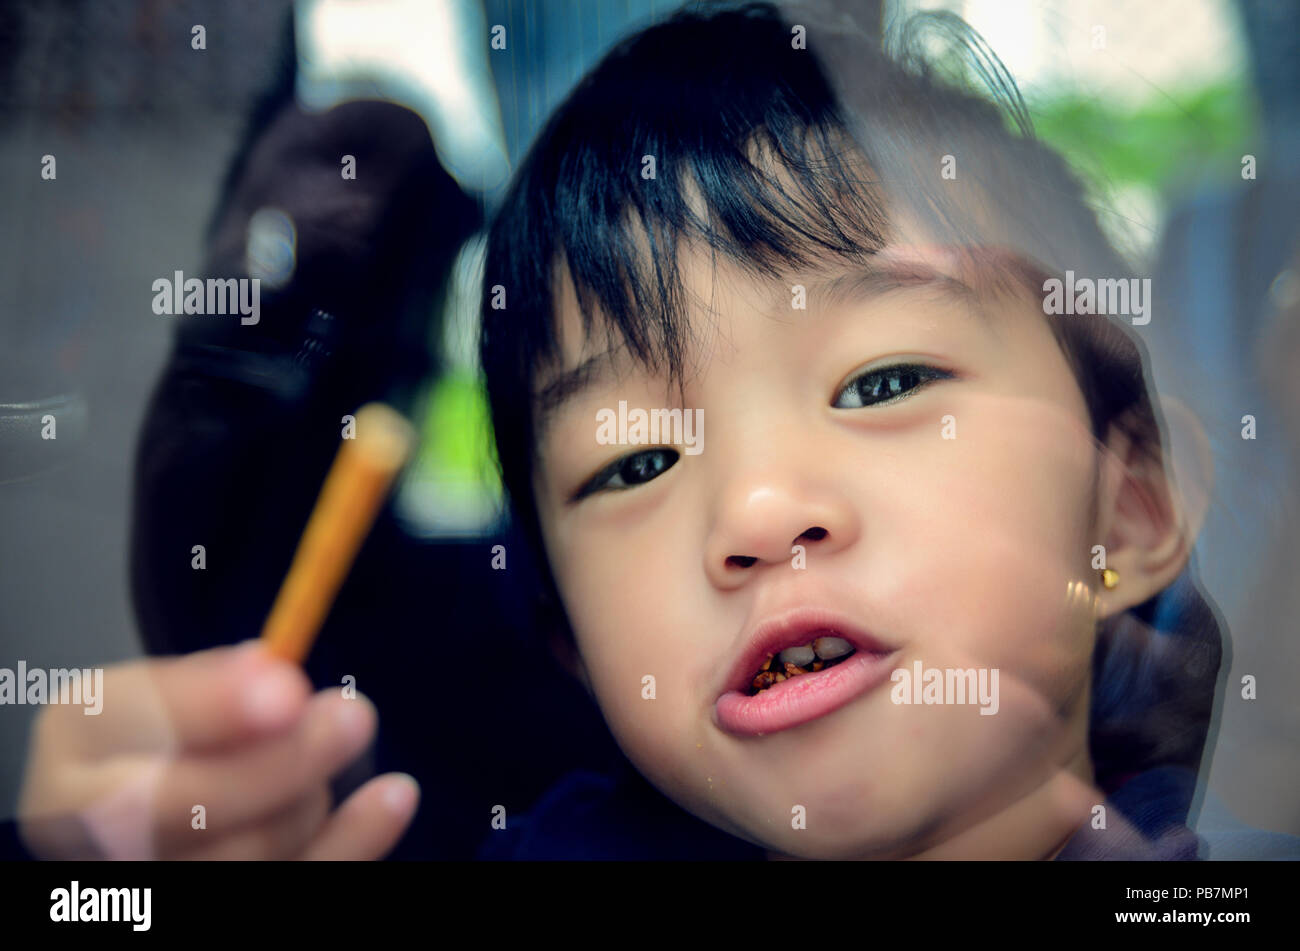 Girl behind the glass window looking outside eating some snacks Stock Photo